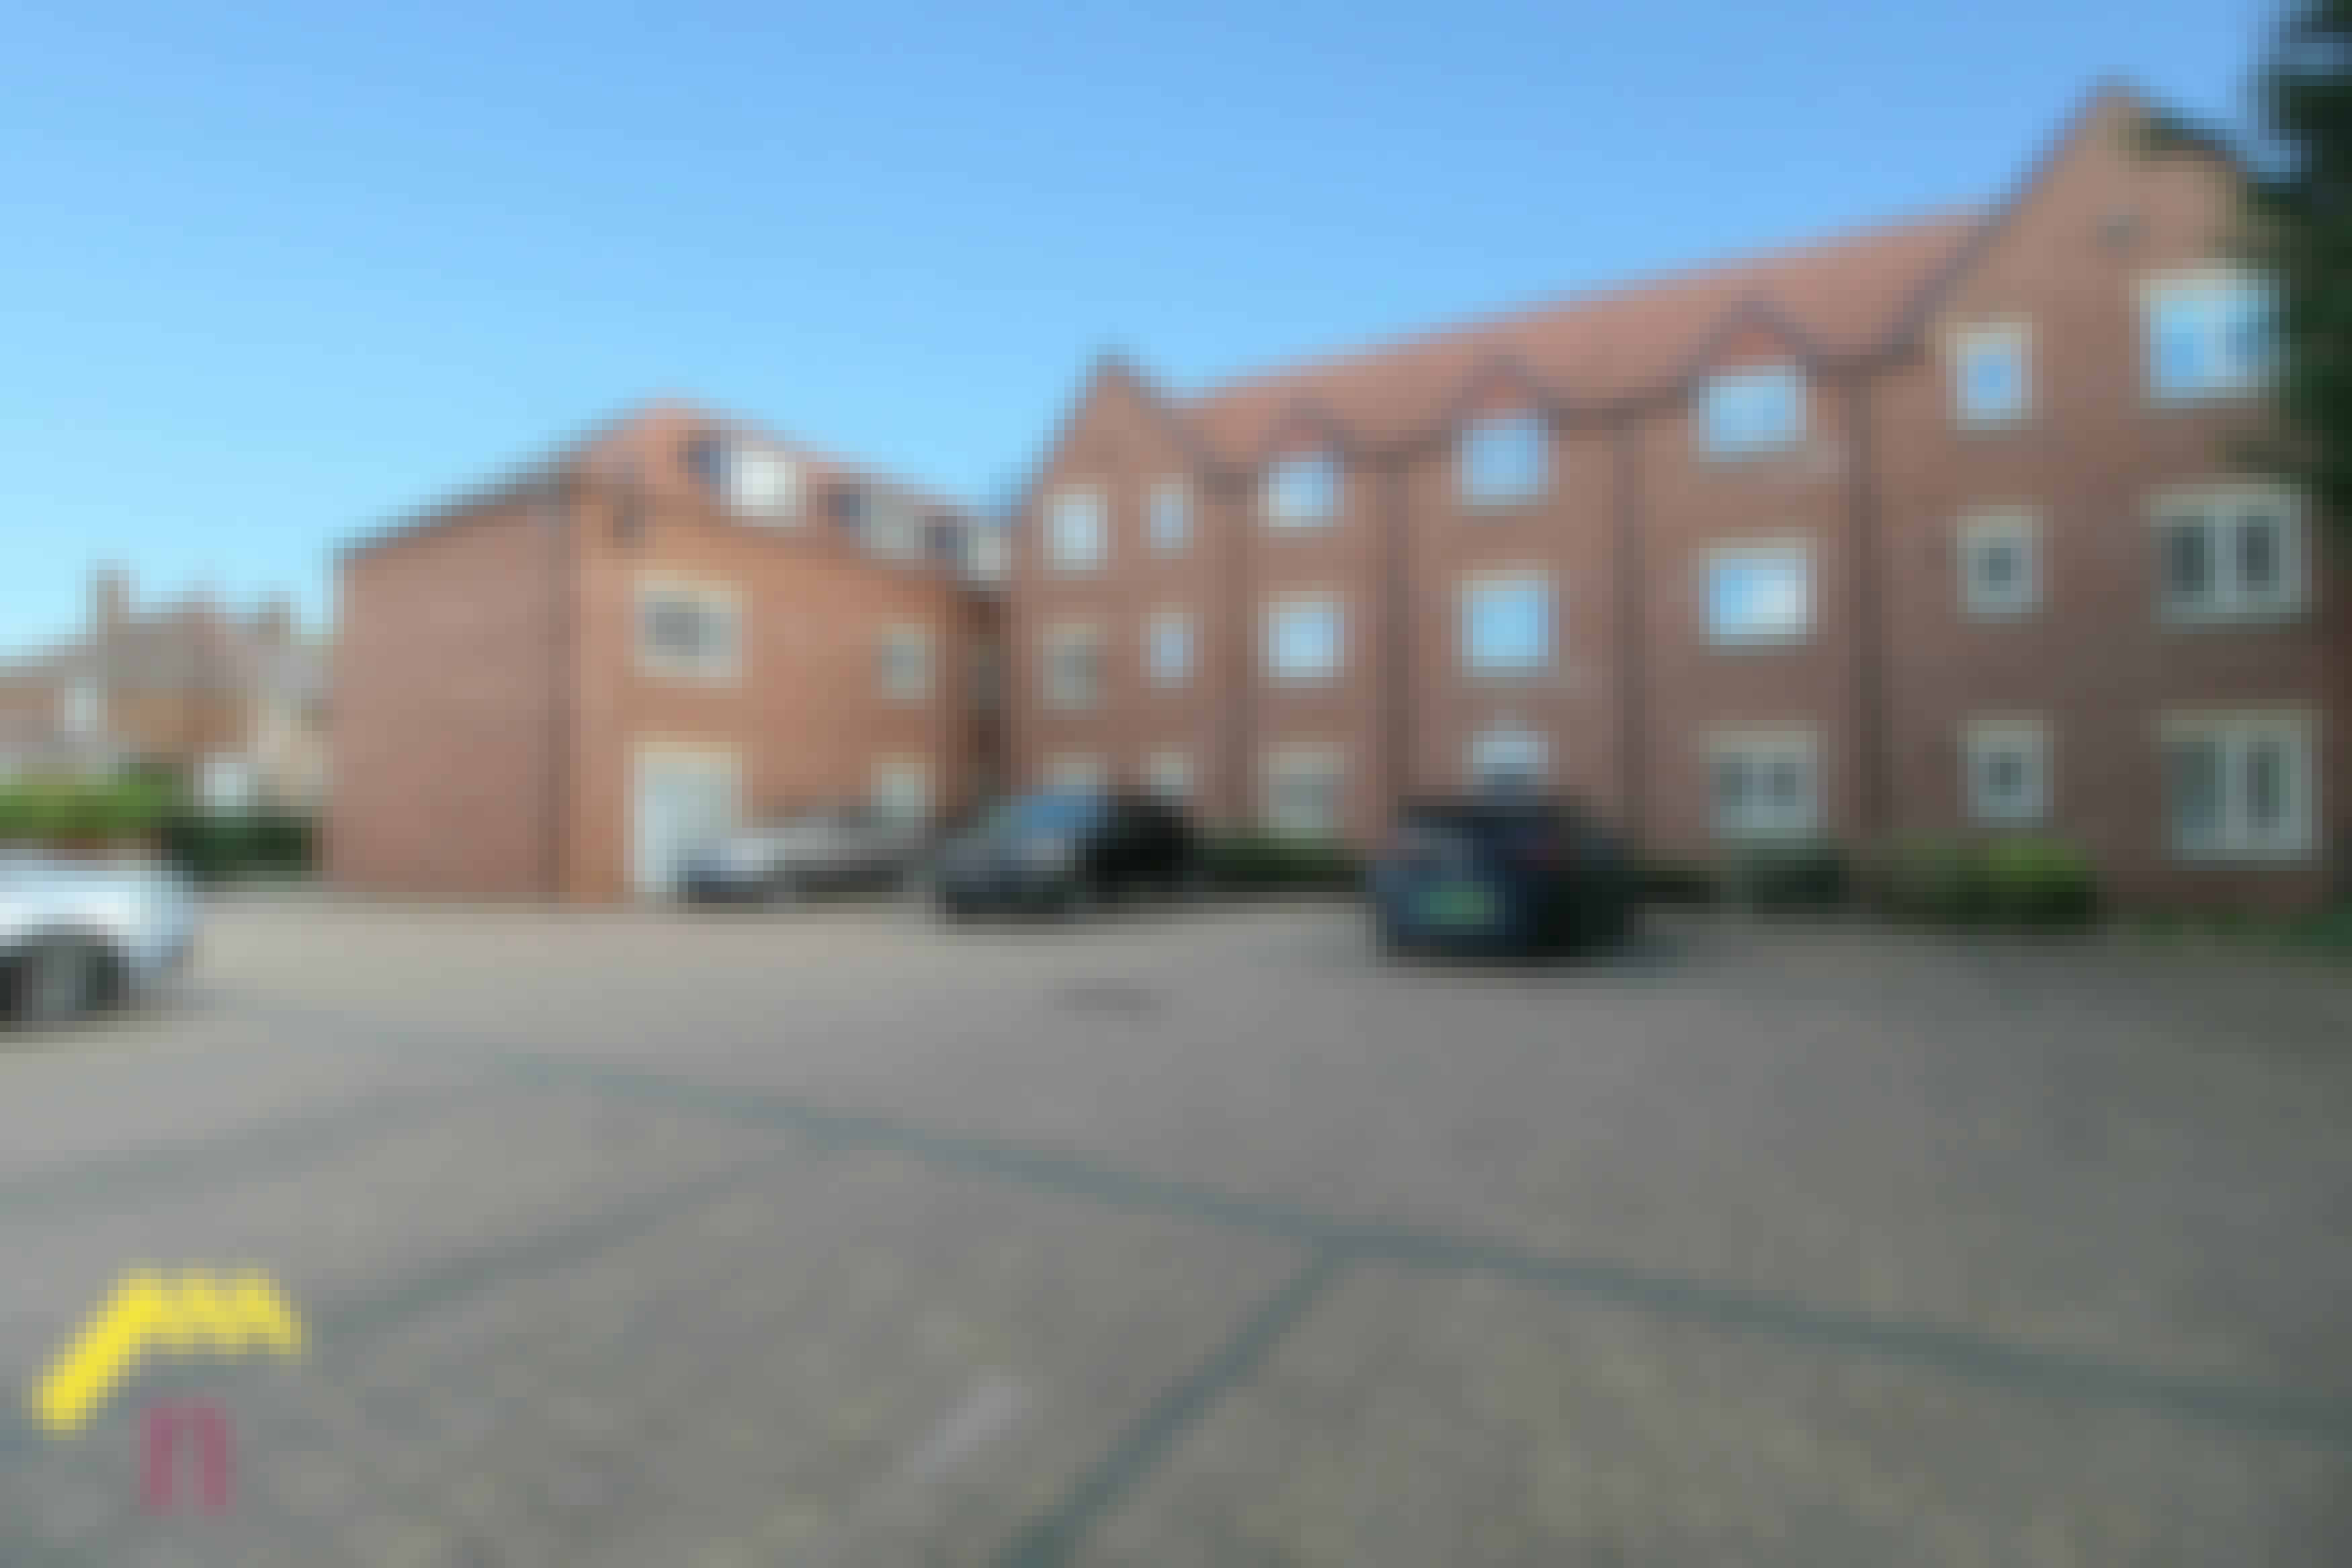 Overview image #4 for Cumberland Court, Wheatley, Doncaster, DN2